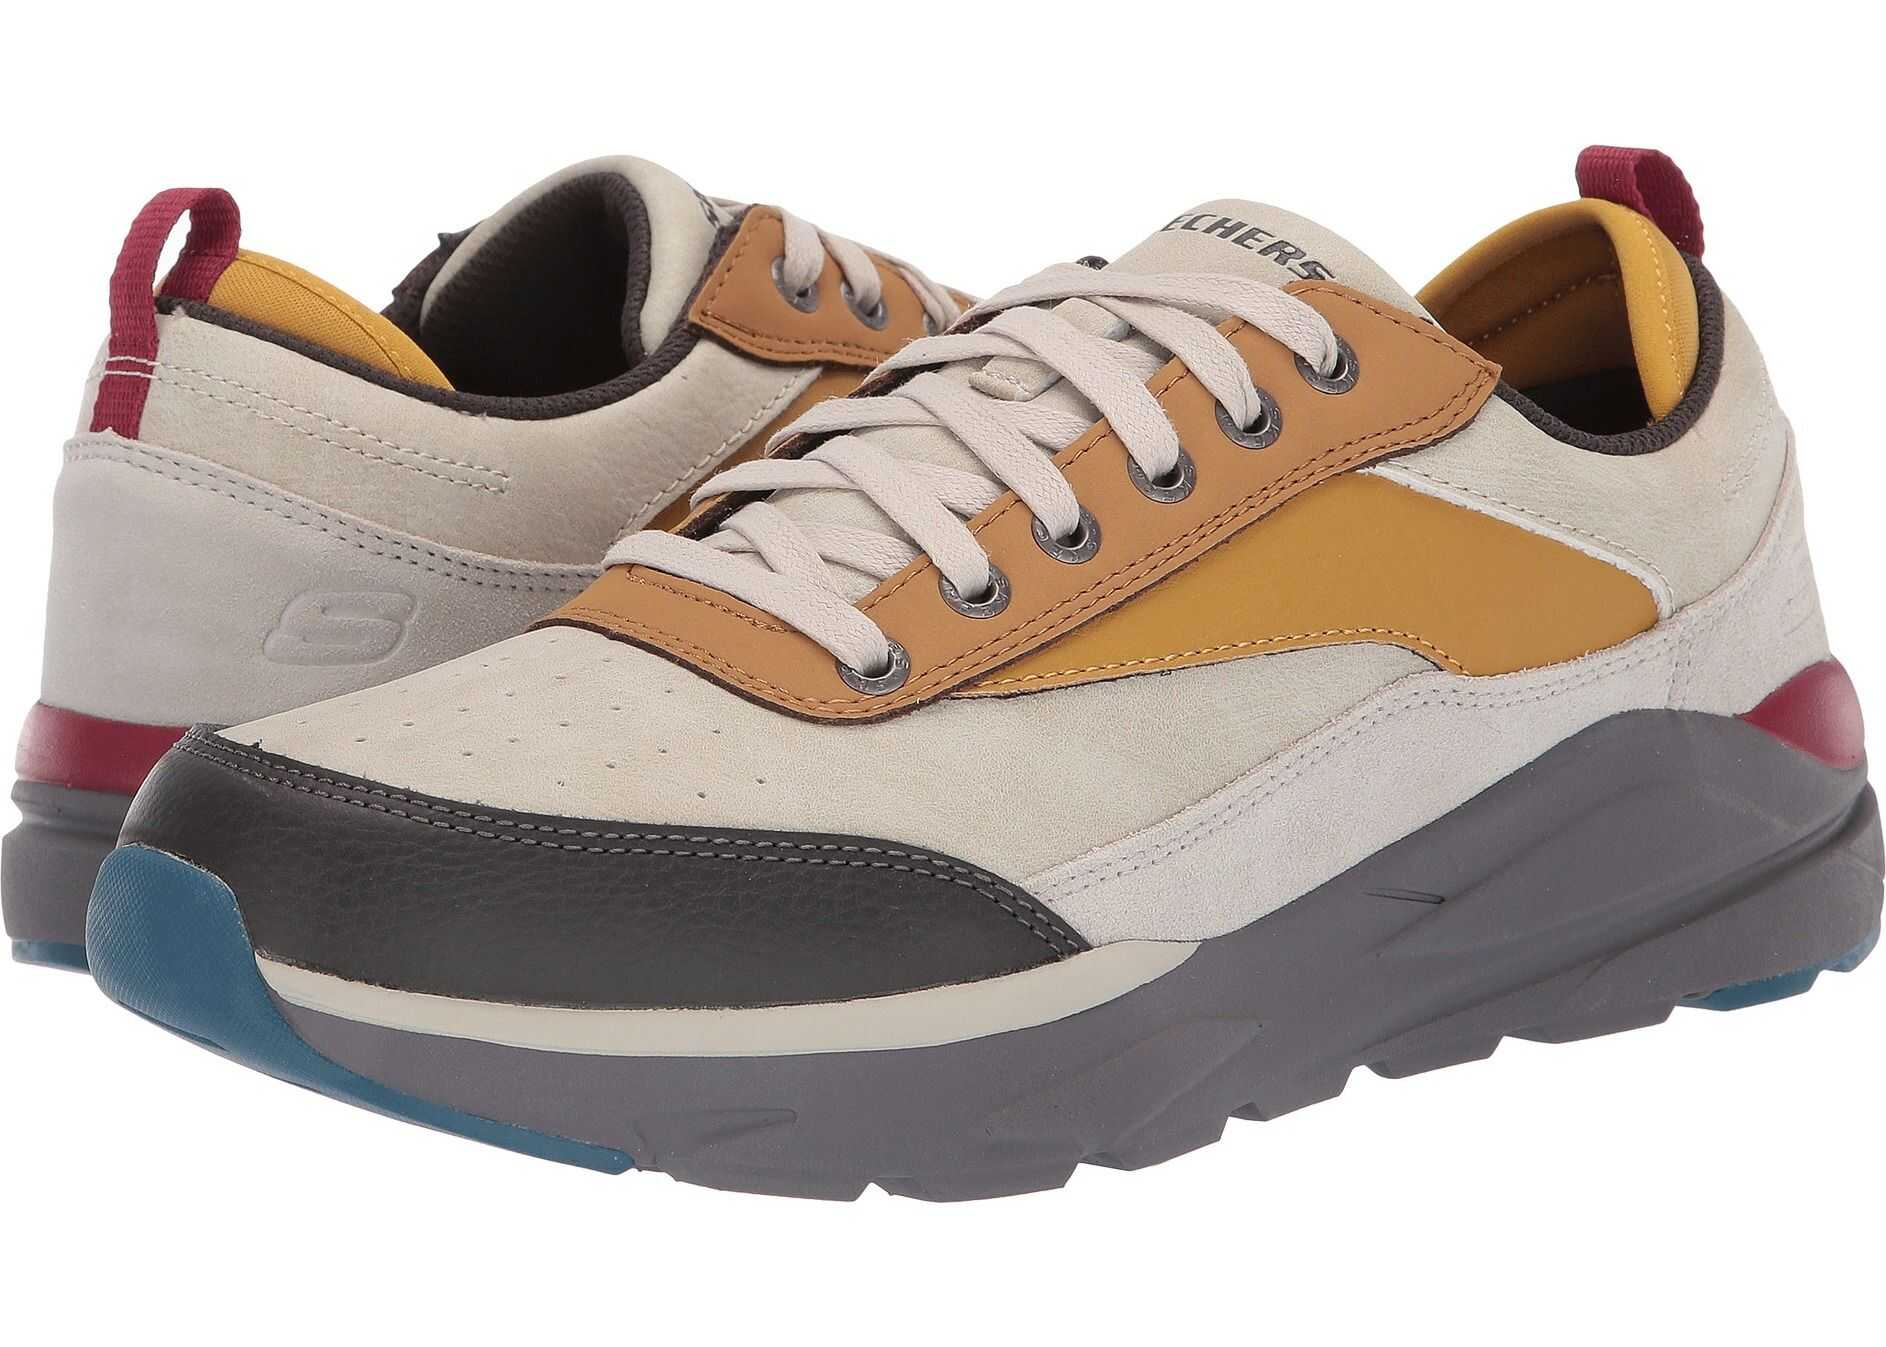 SKECHERS Relaxed Fit Verrado - Corden Taupe/Gold